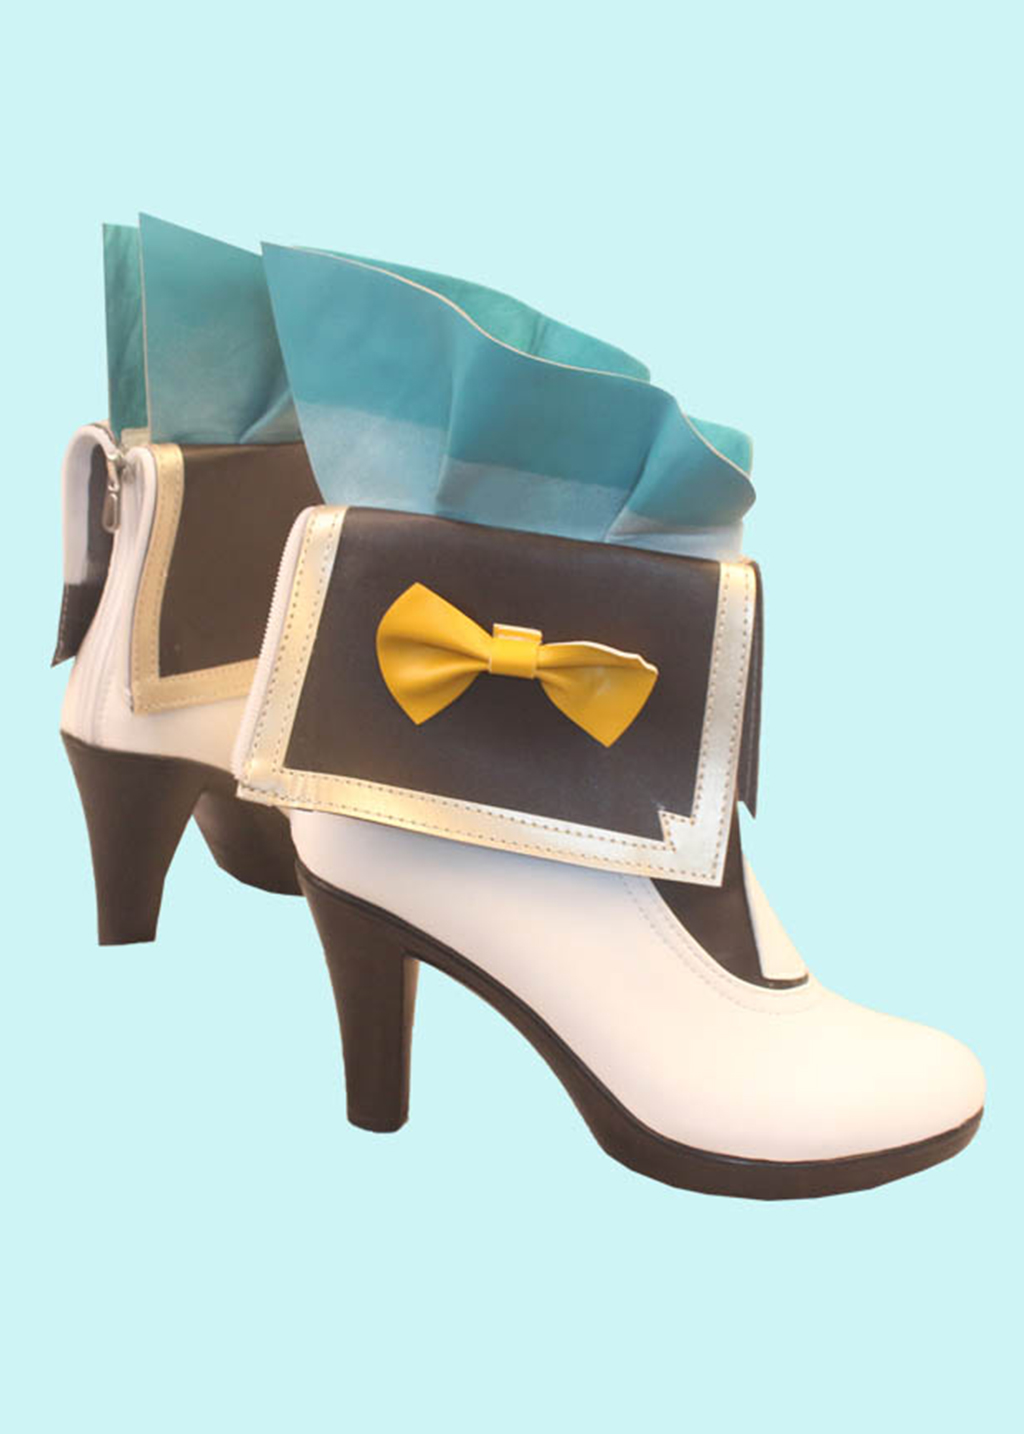 Firefly Shoes Honkai Star Rail Boots Cosplay